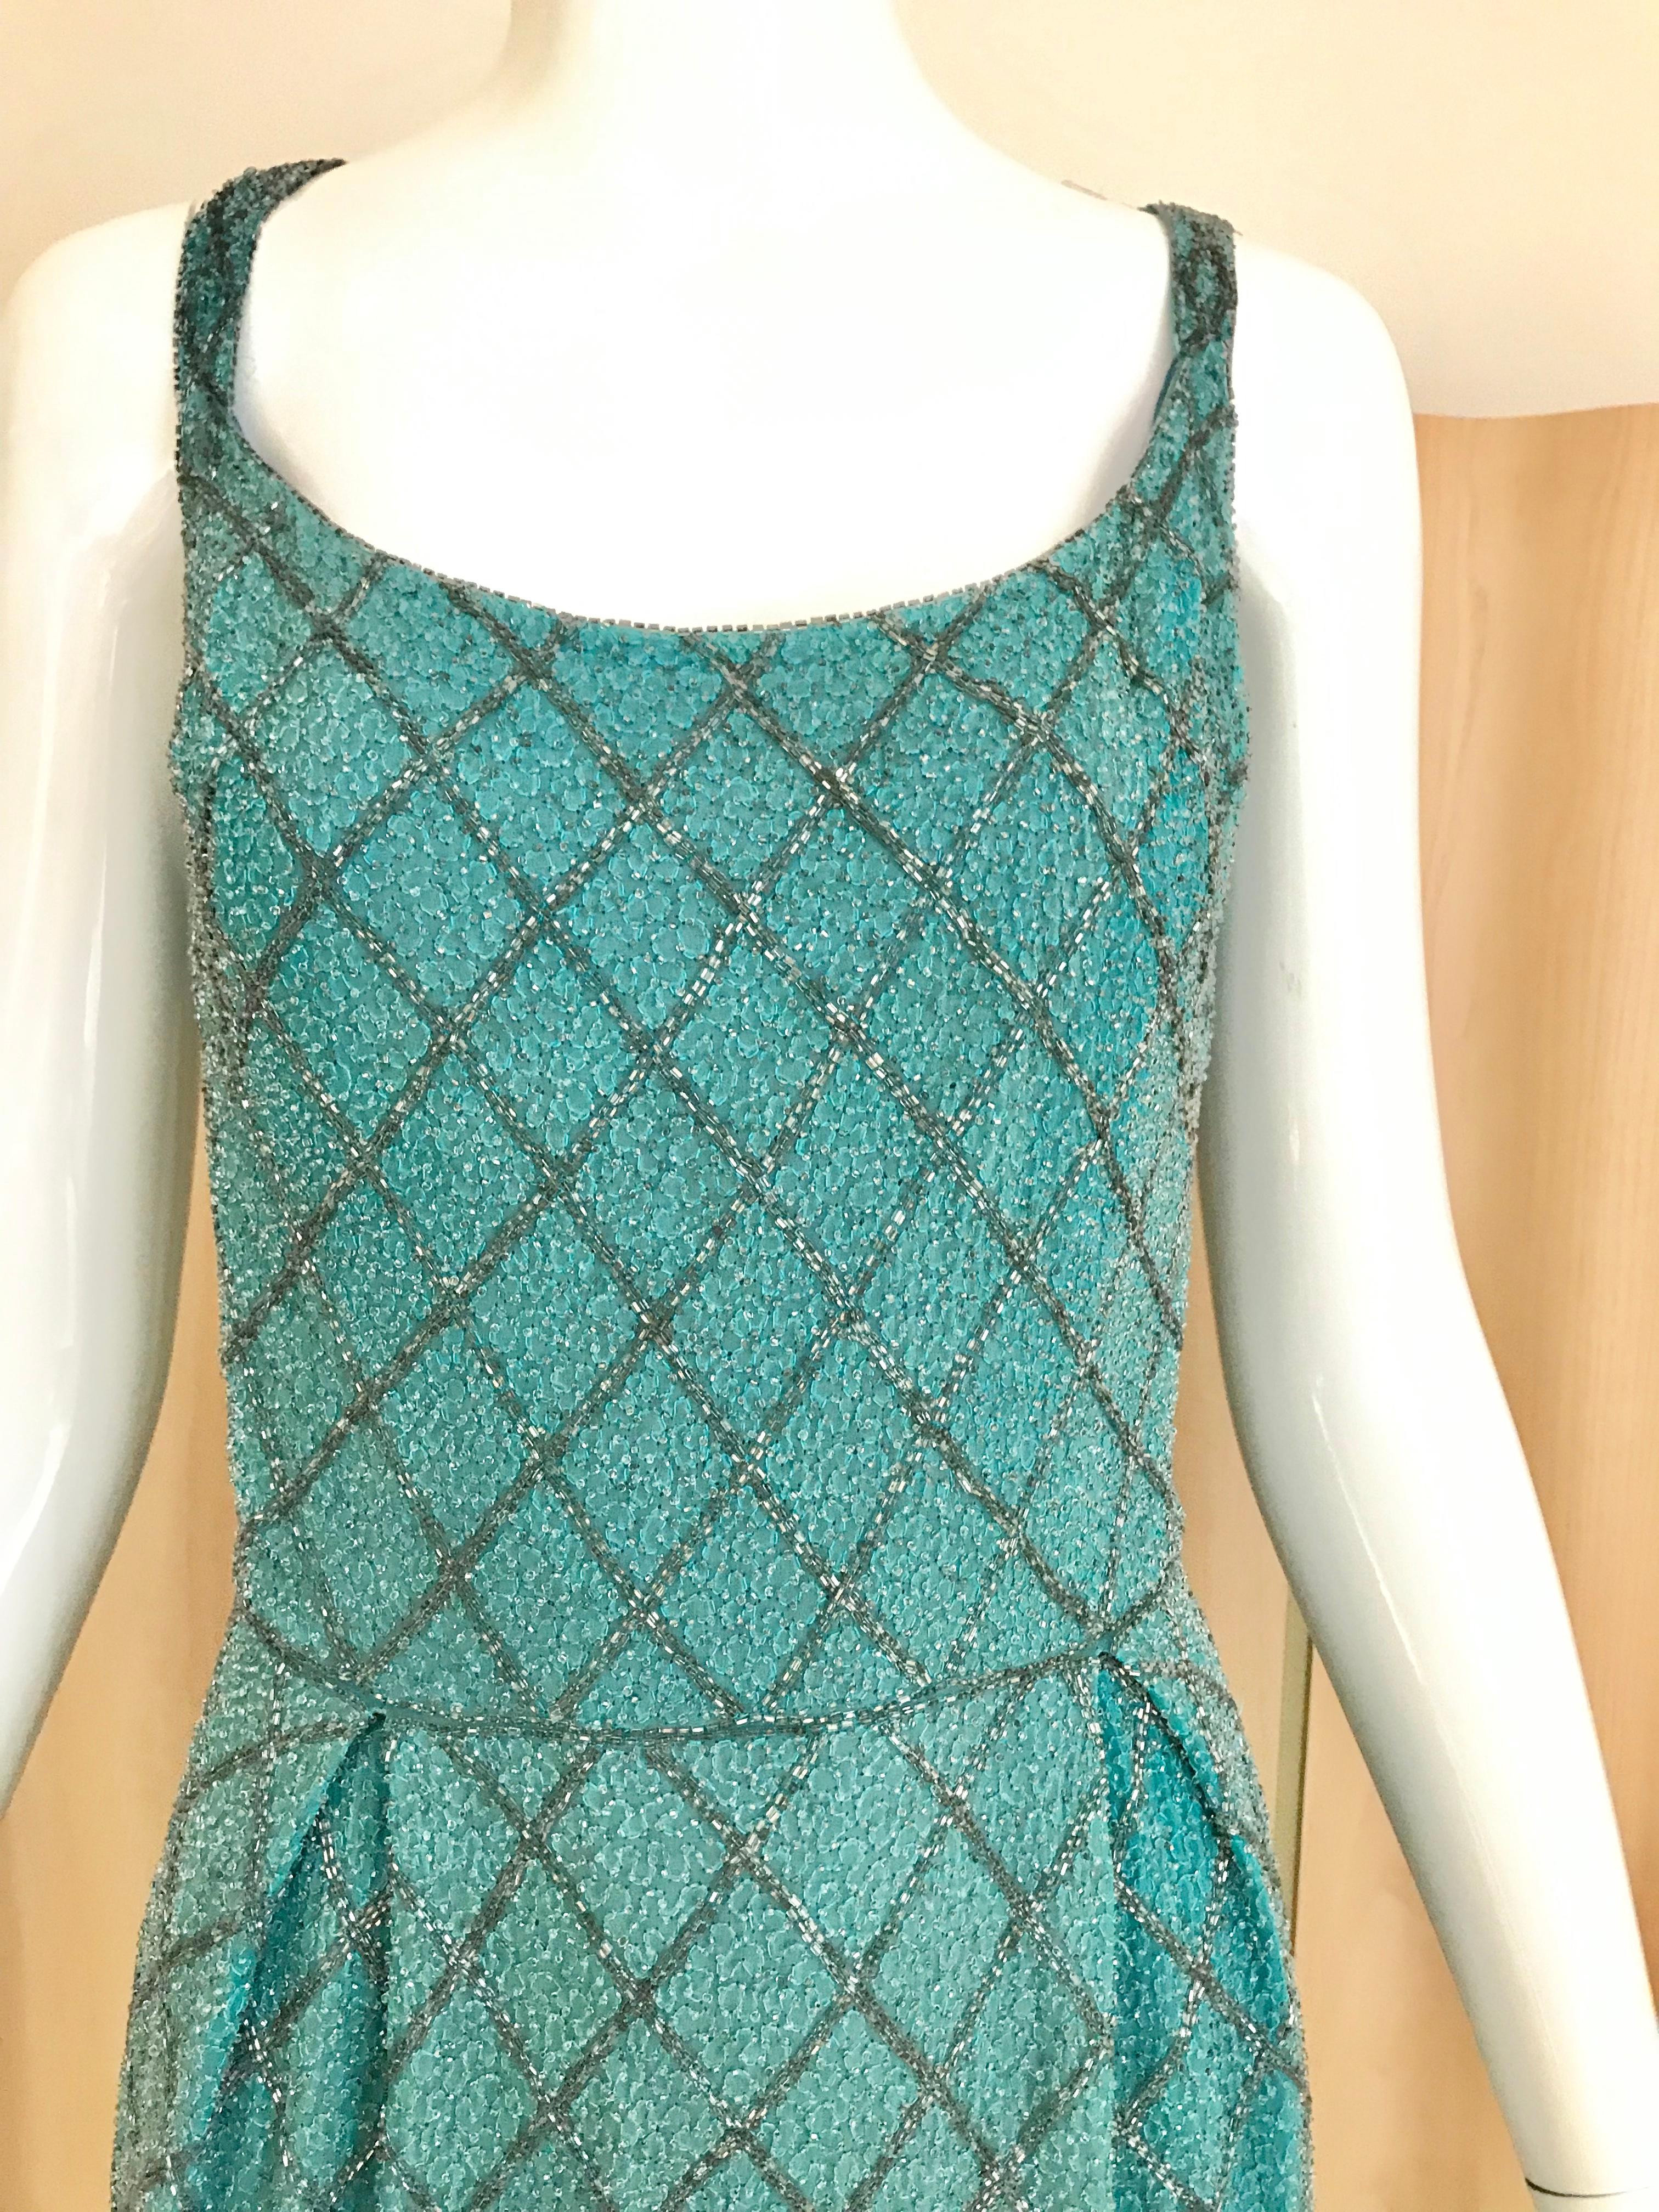 Timeless 1960s Blue silk Wiggle dress in silver beads and grey beads
Size: Small or fit 0/2/4
Bust: 34.5 inches / Waist: 26 inches/ Hip: 36inches/ Dress length: 40 inches